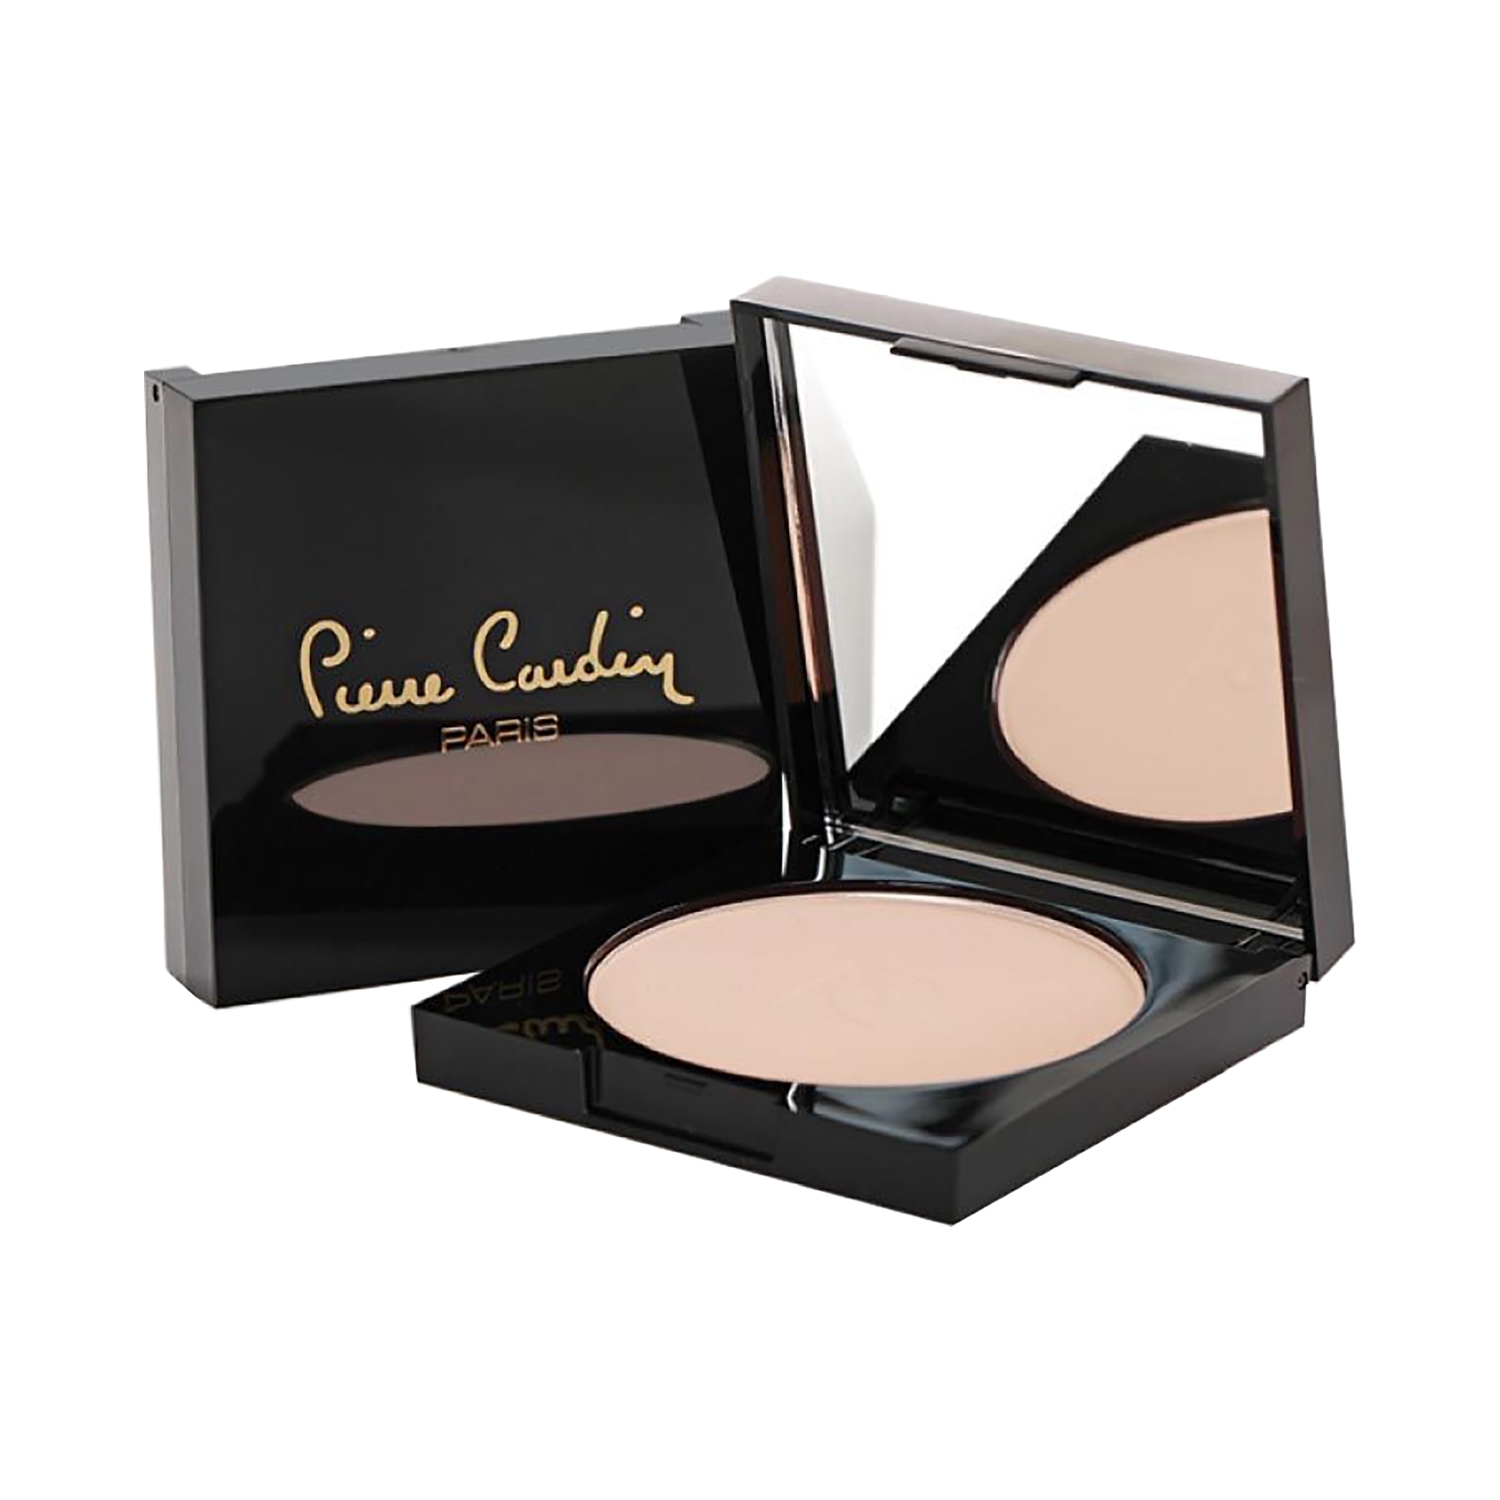 Pierre Cardin Paris | Pierre Cardin Paris Porcelain Edition Compact Powder - 655 Golden Ivory (12g)